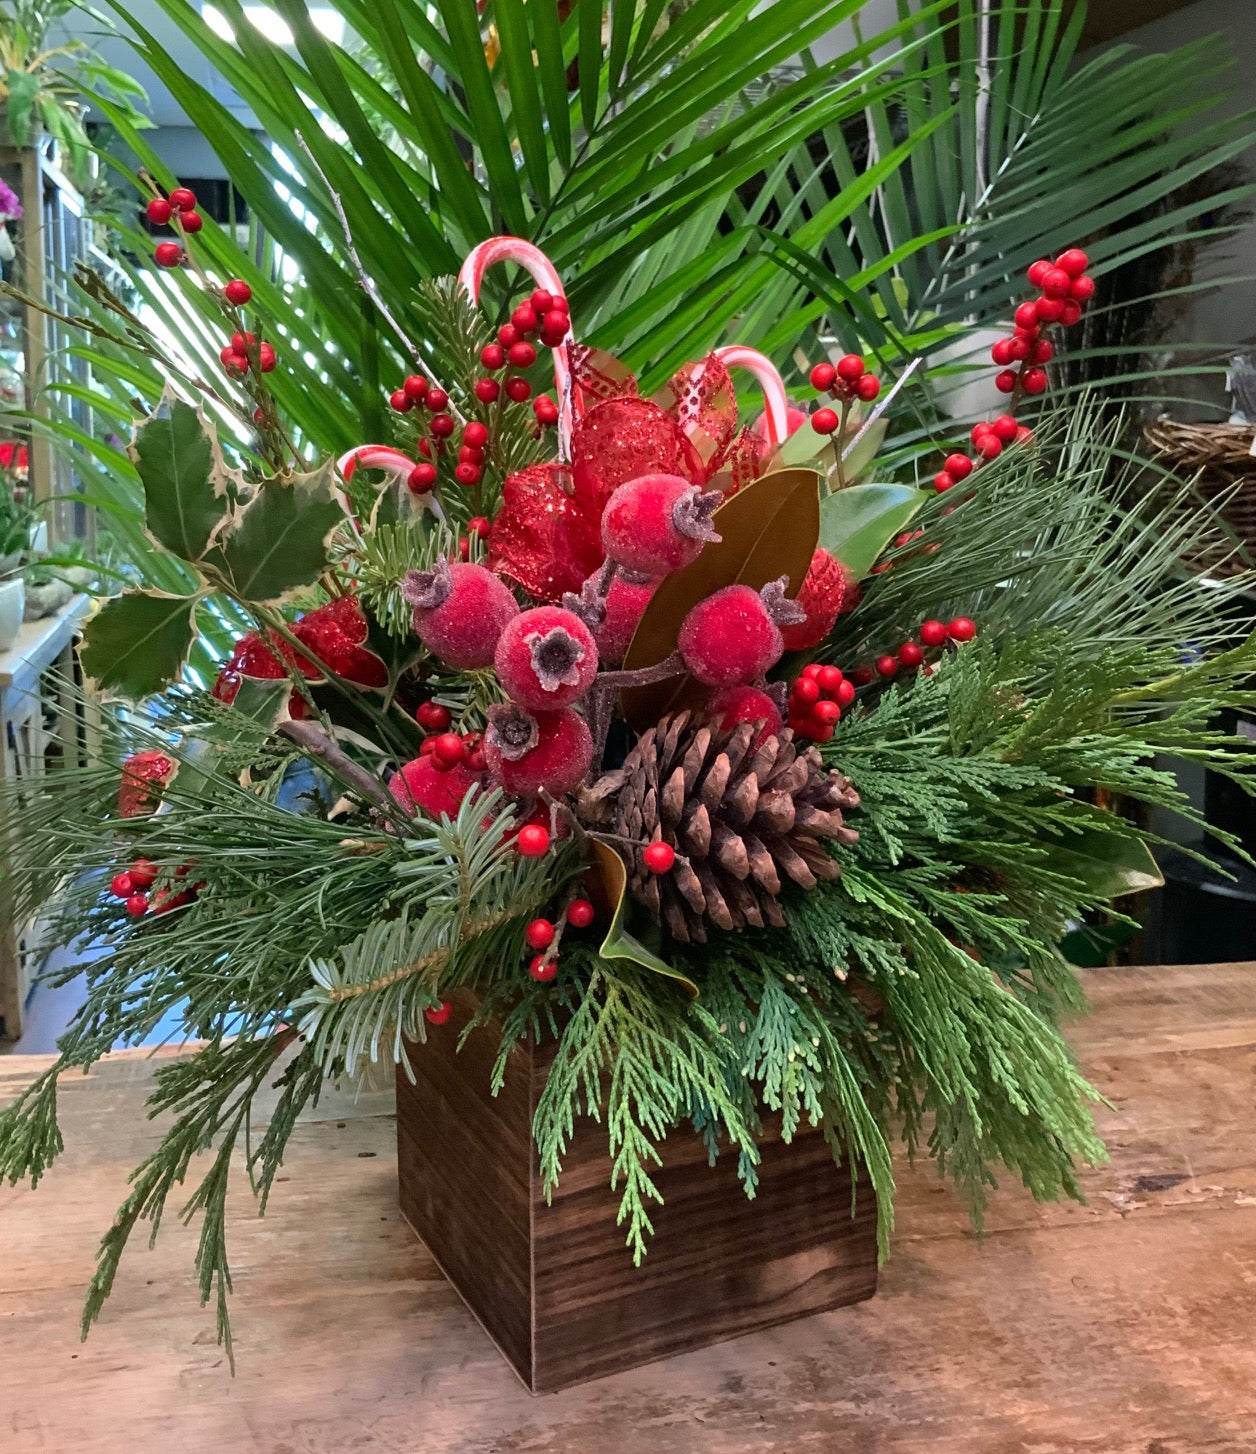 Candy Cane Lane- Christmas Greens with Pinecones, Berries and Magnolia Leaves in a Wooden Container